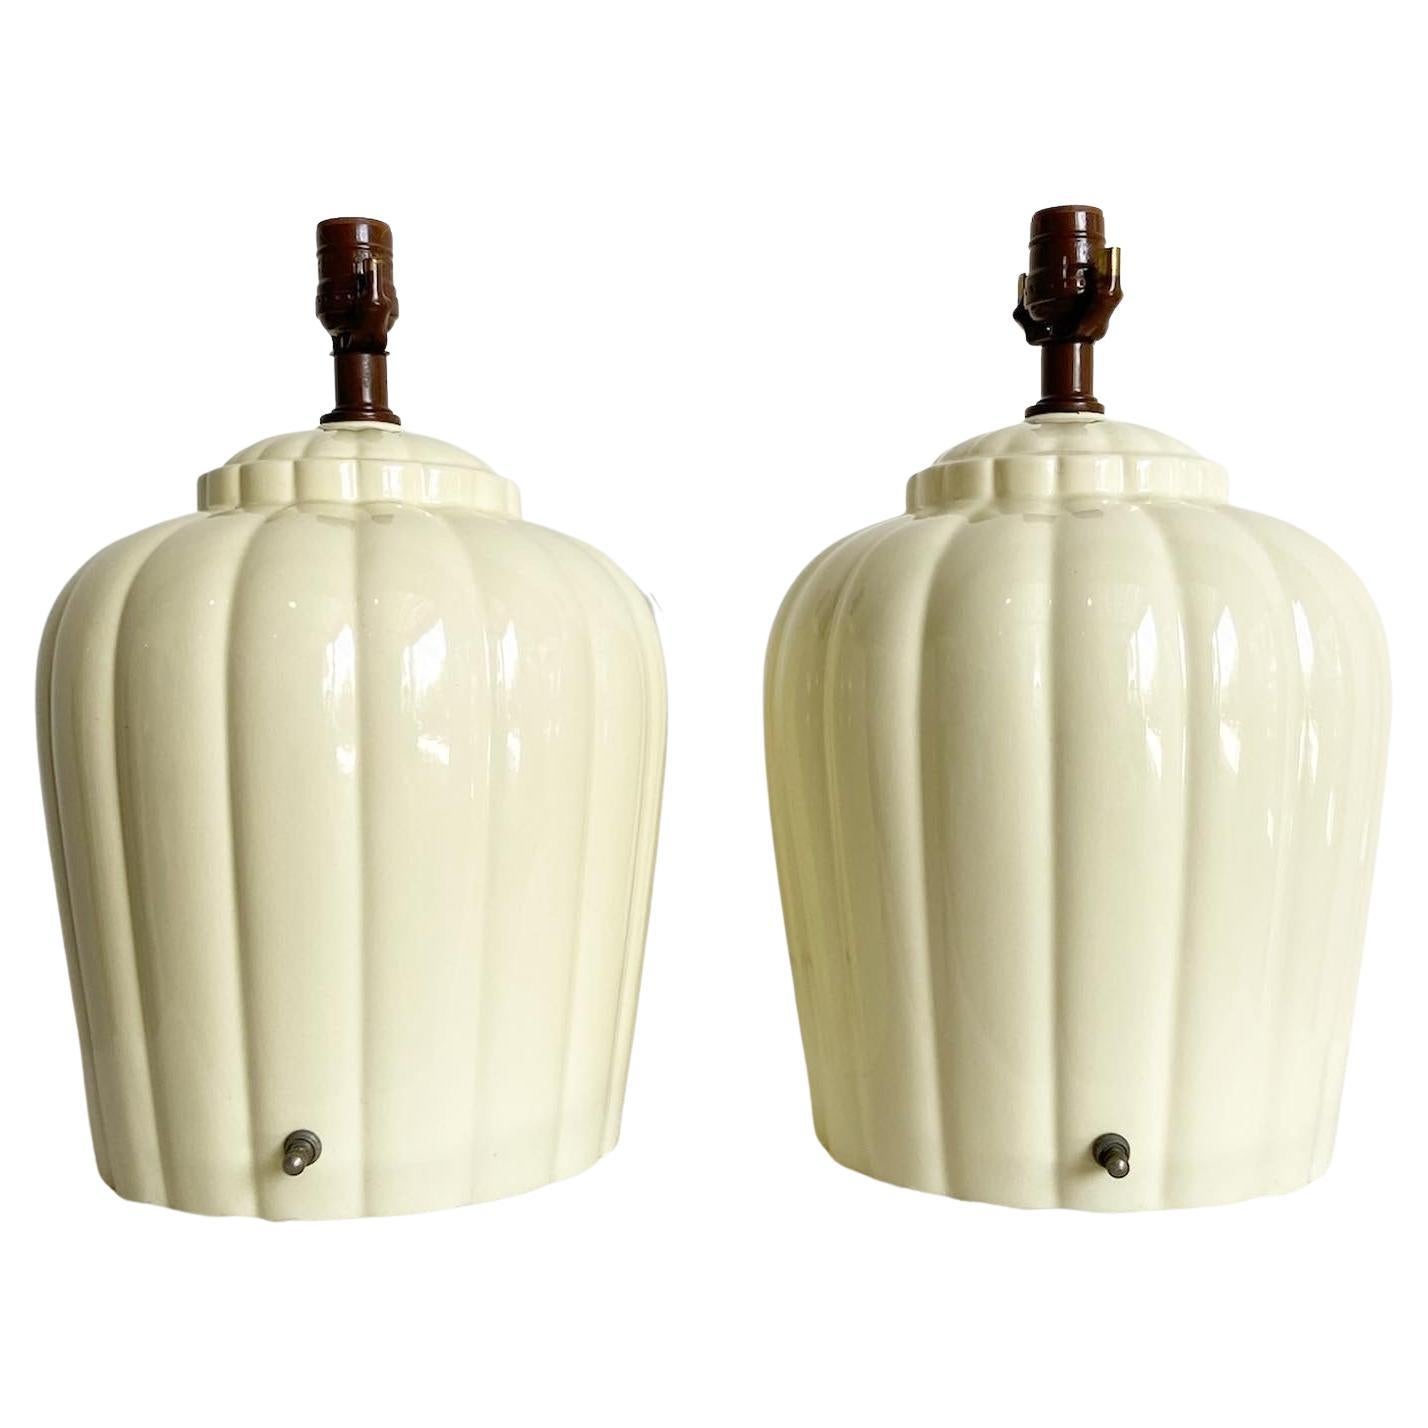 Postmodern Scalloped Cream Ceramic Table Lamps – a Pair For Sale